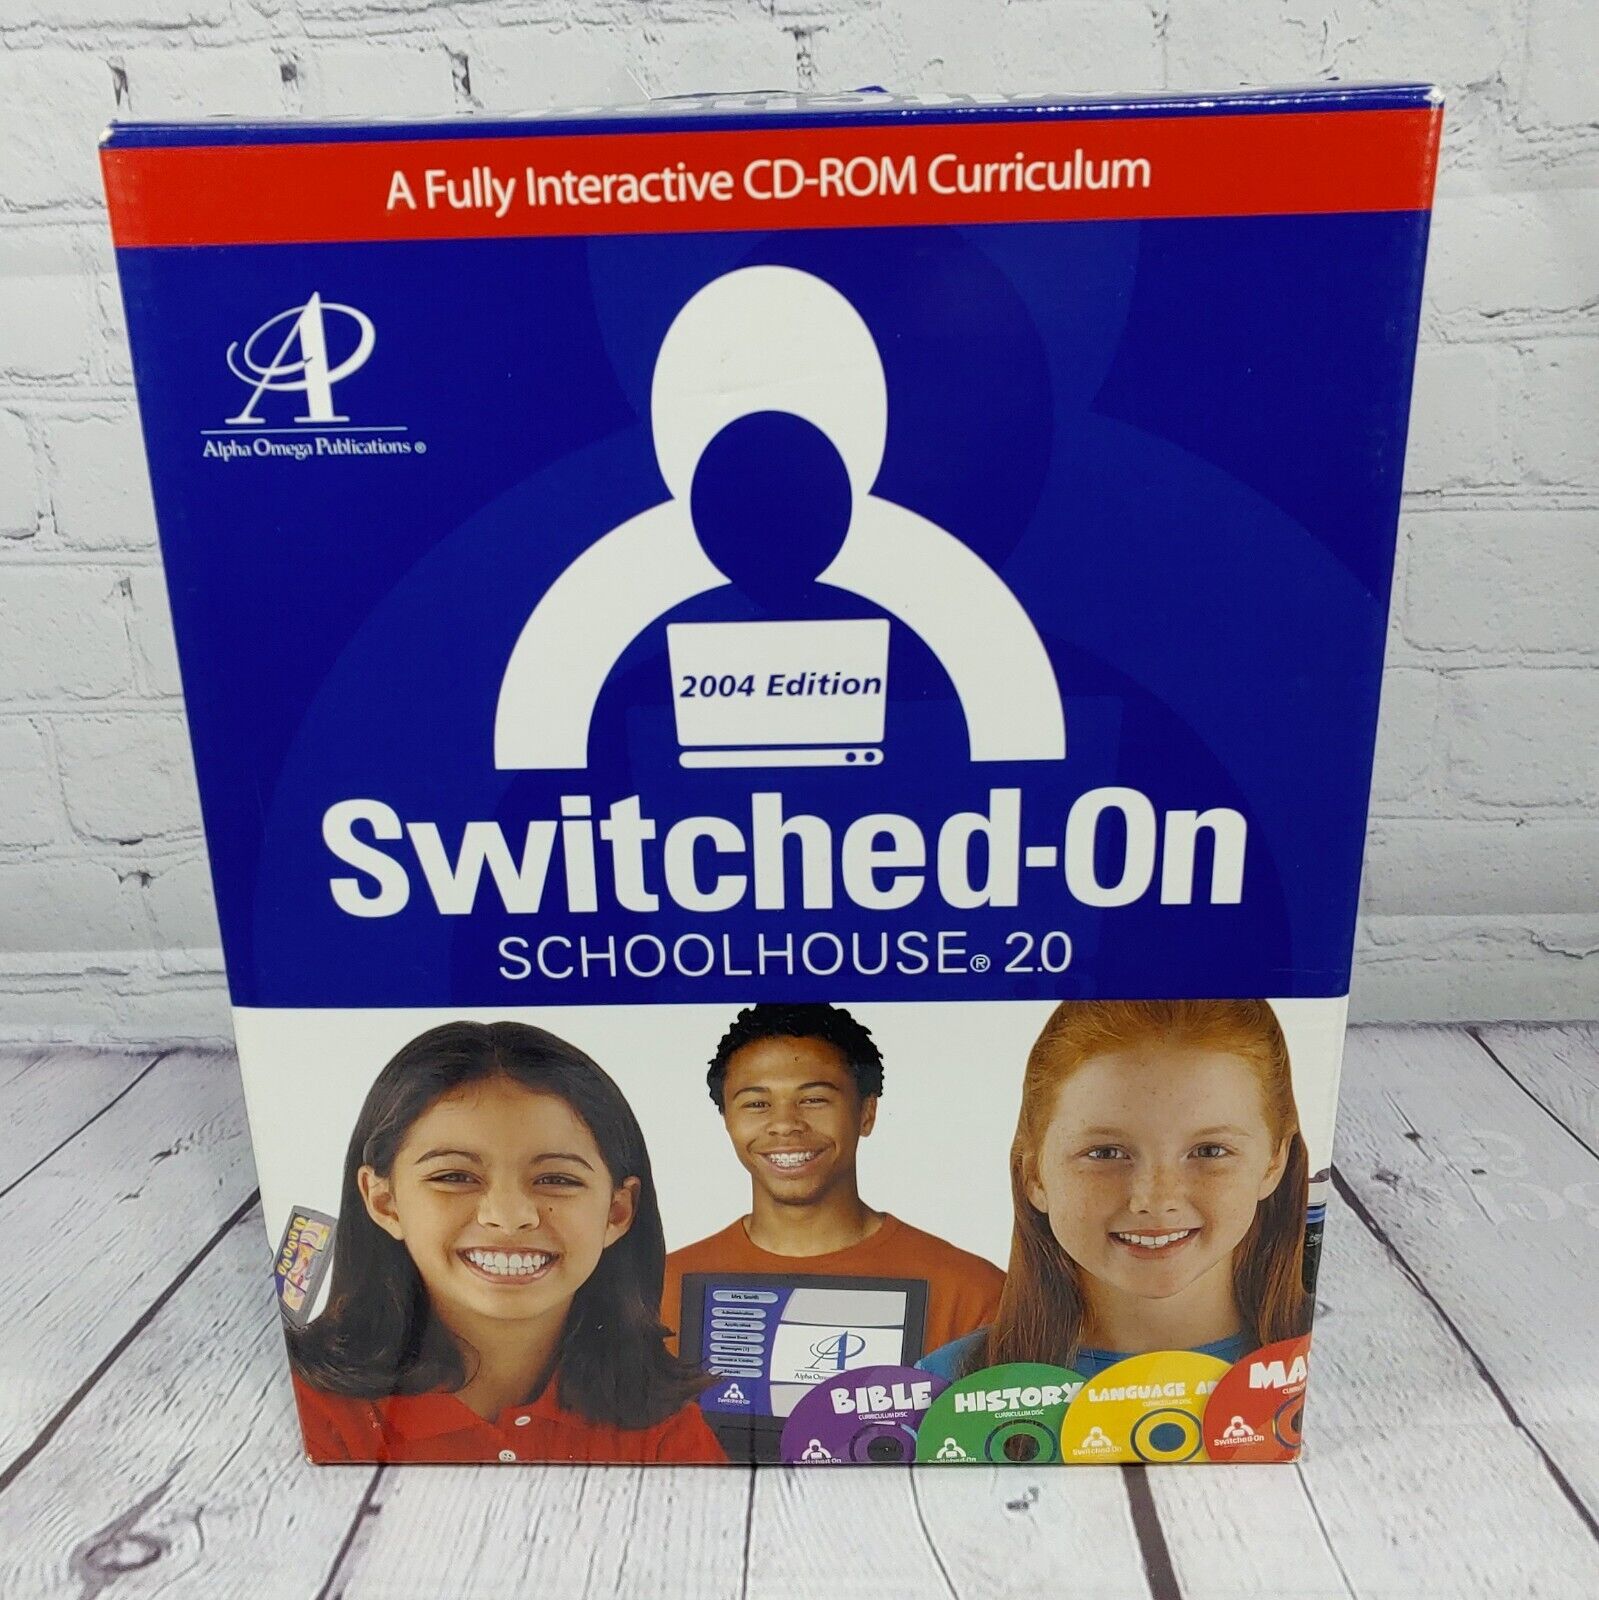 Switched-On Schoolhouse 2.0 Home 2004 Edition Alpha Omega Publications CD-ROM